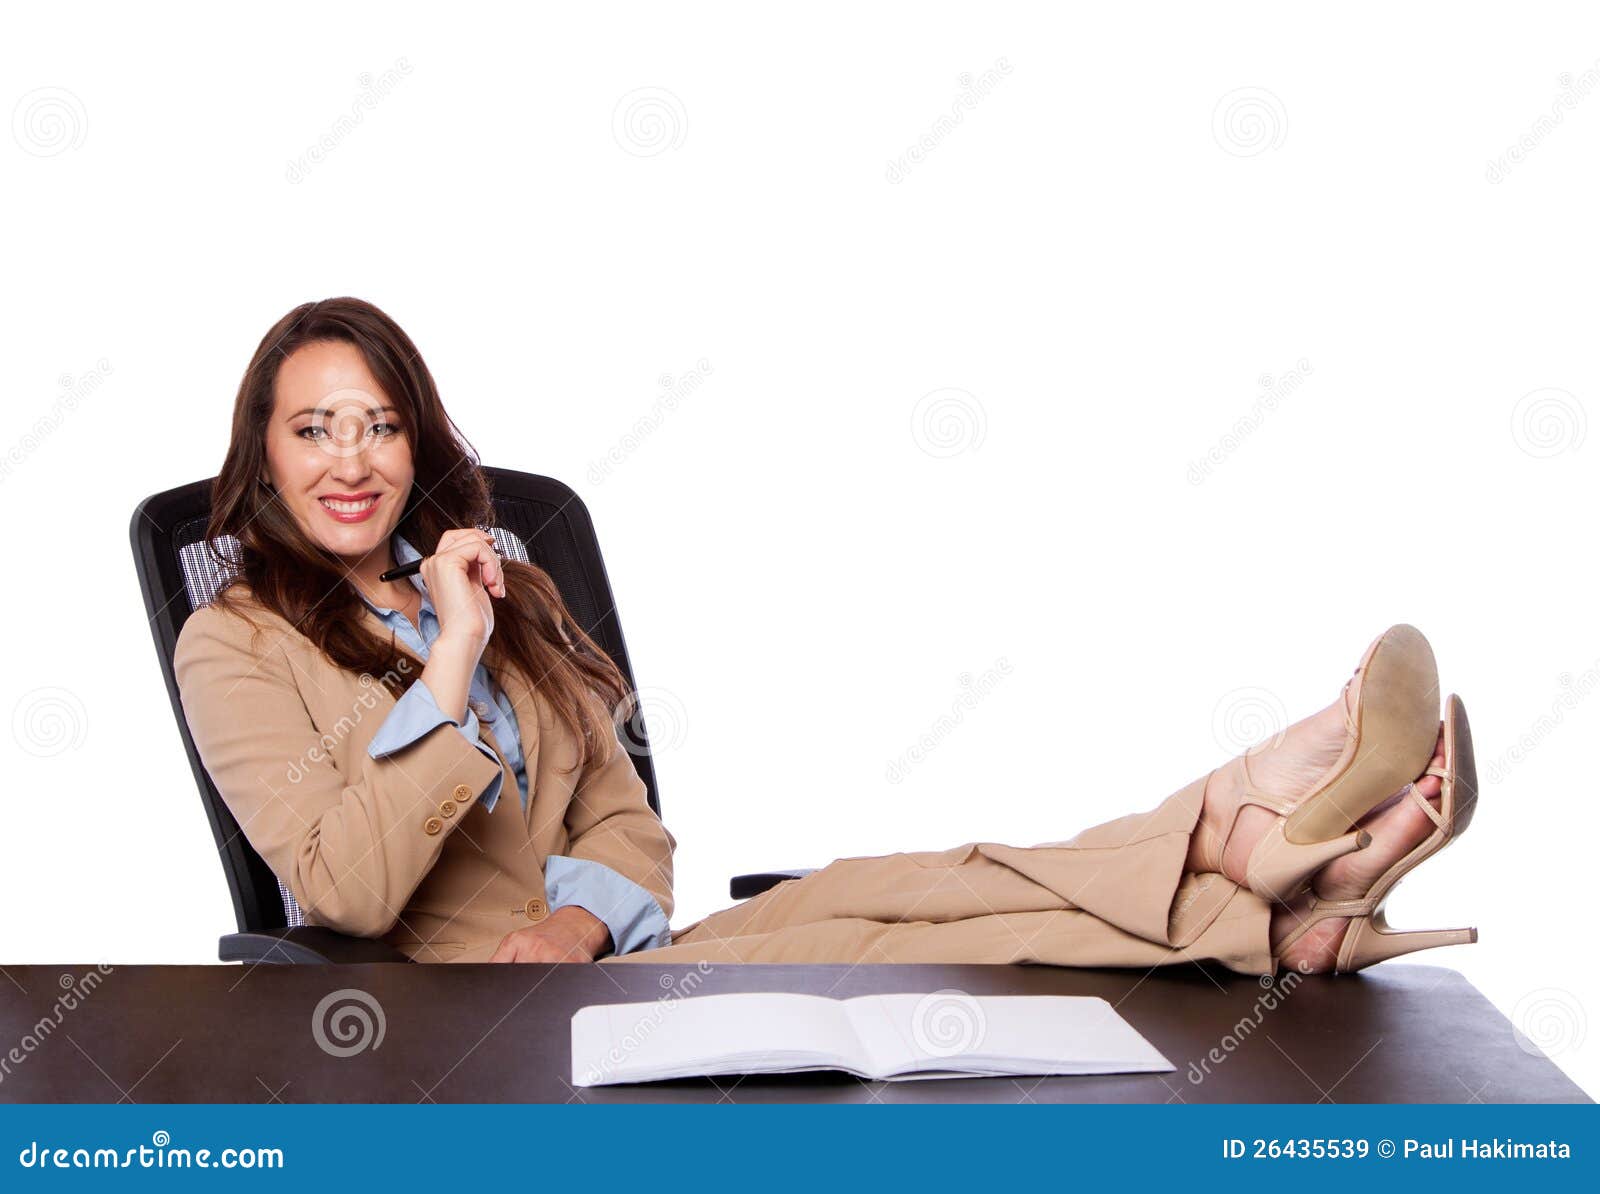 4,019 Woman Feet On Desk Images, Stock Photos, 3D objects